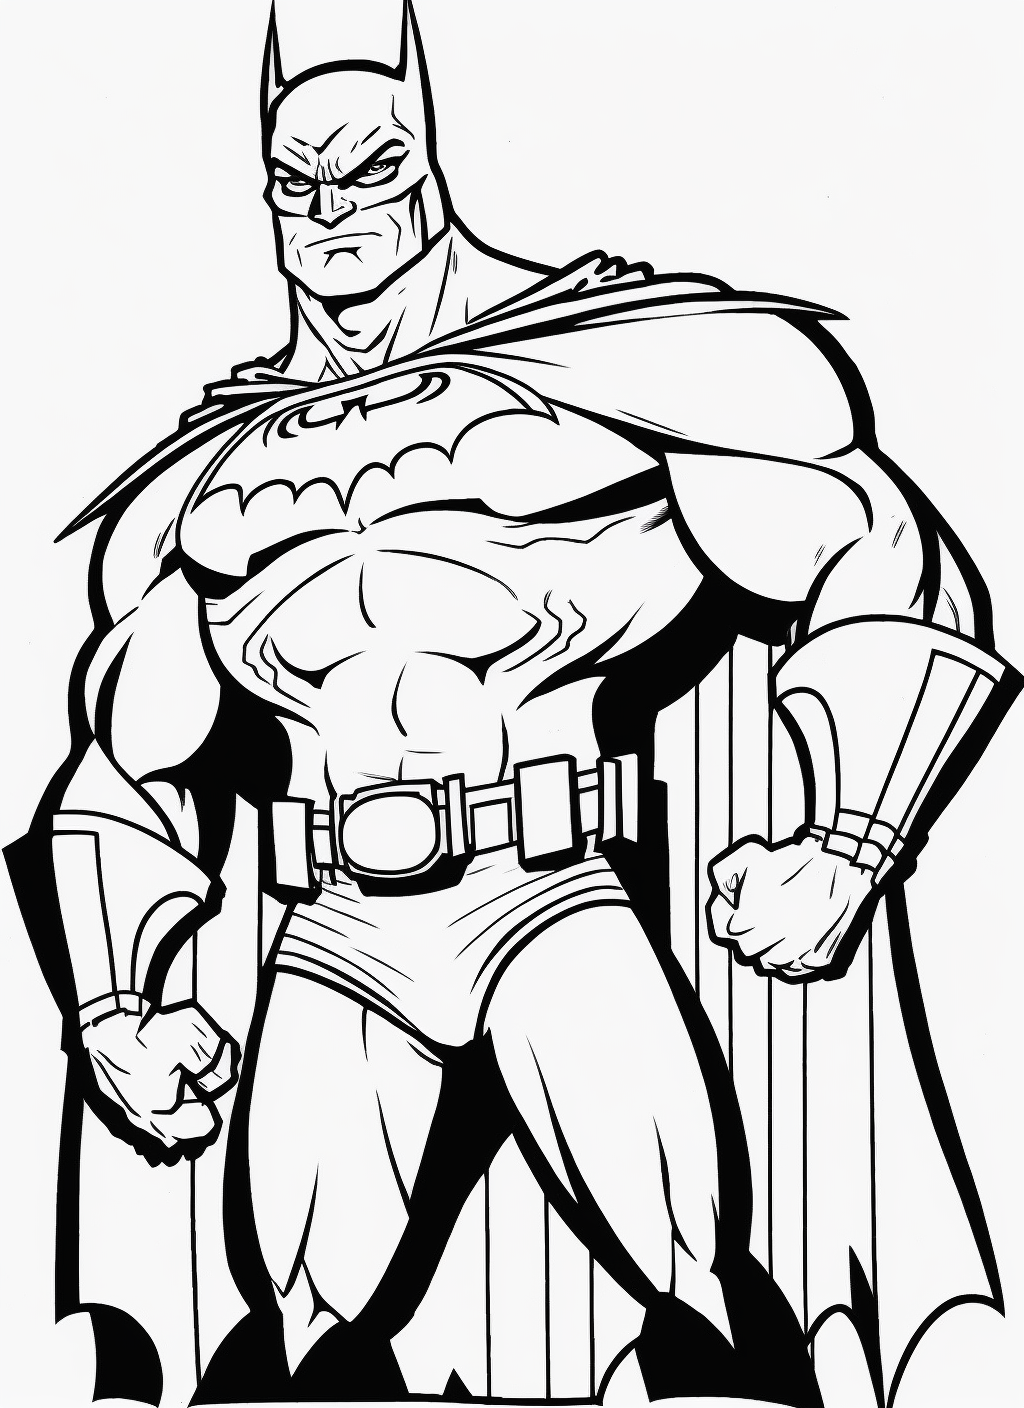 Line art black and white batman cartoon sketch coloring page for kids coloring page for children